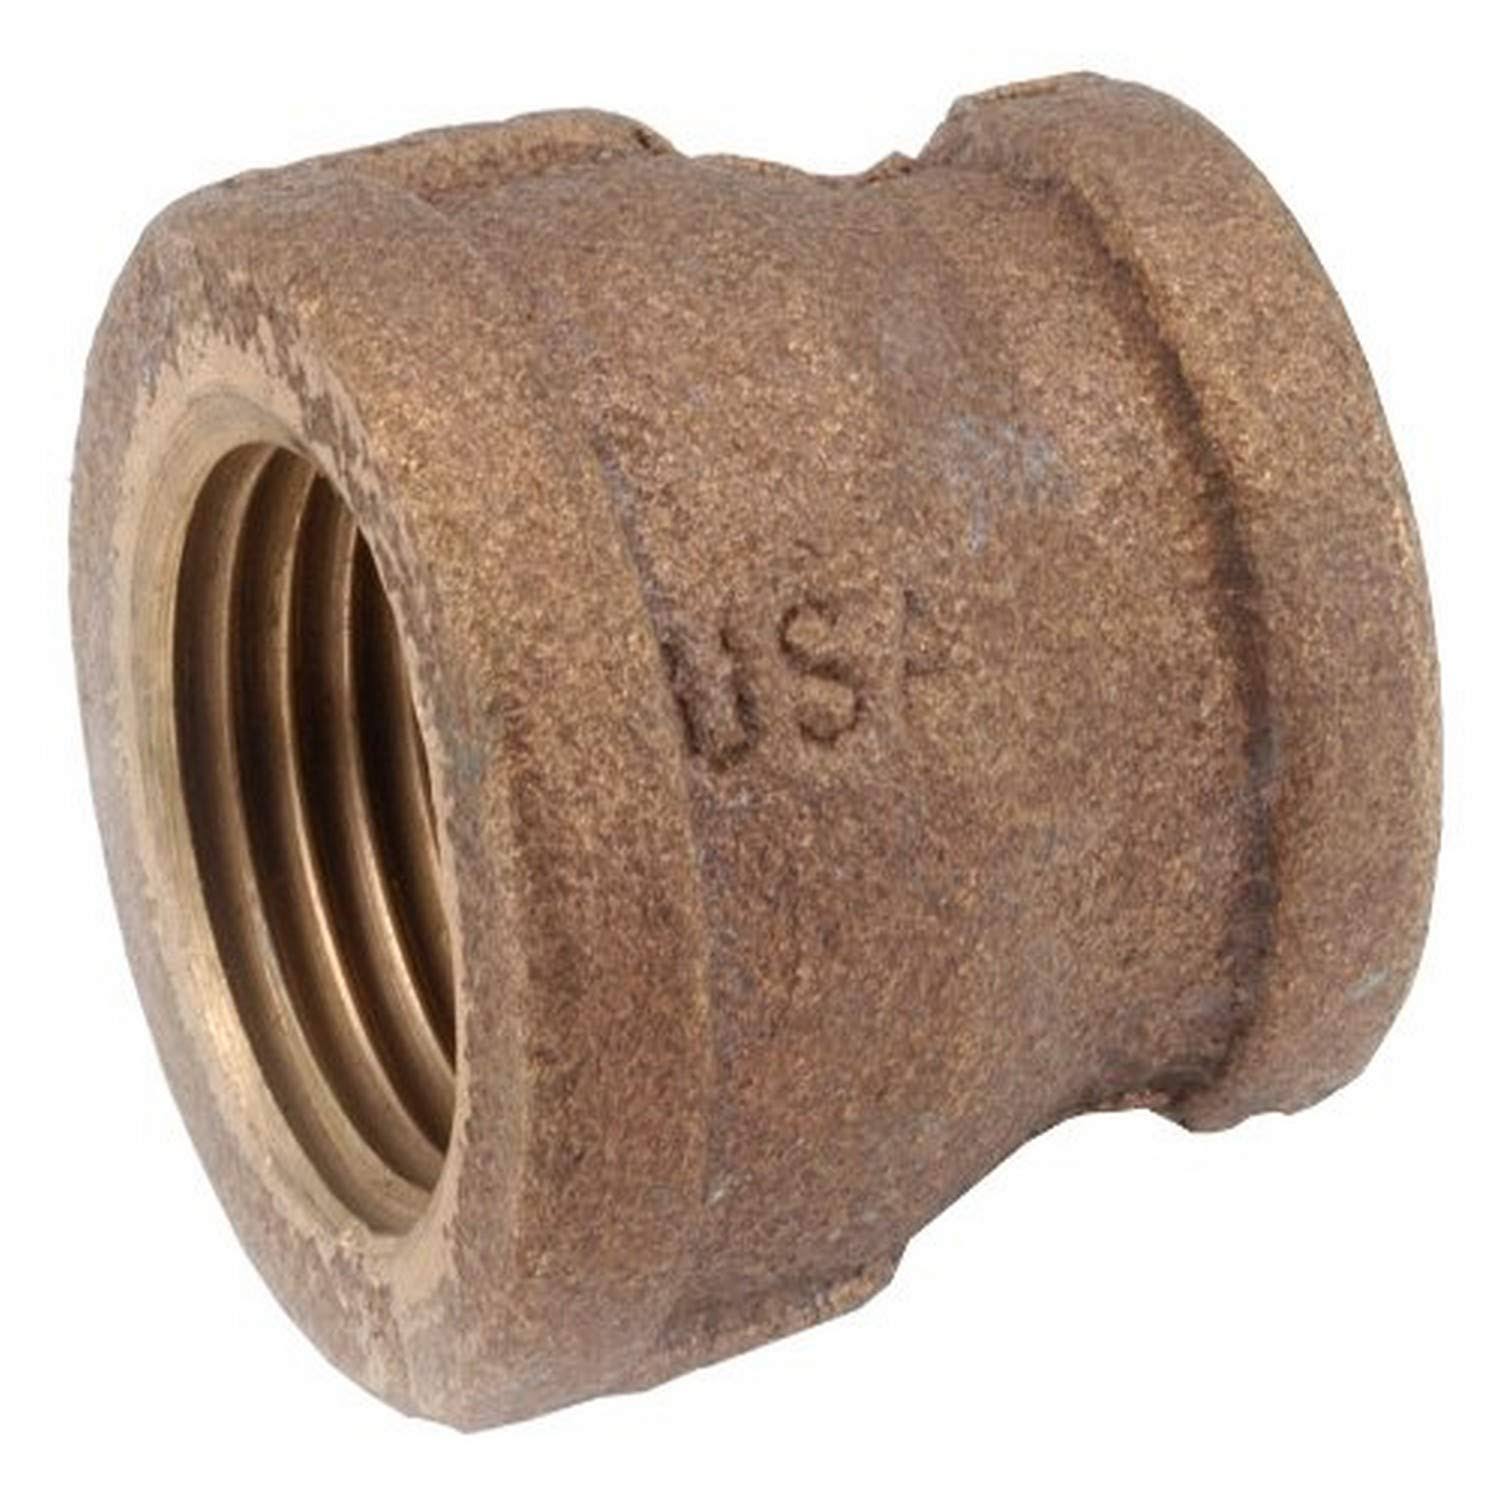 Anderson Metals 738119-0804 Red Brass Low Lead Coupling - 1/2"x1/4"